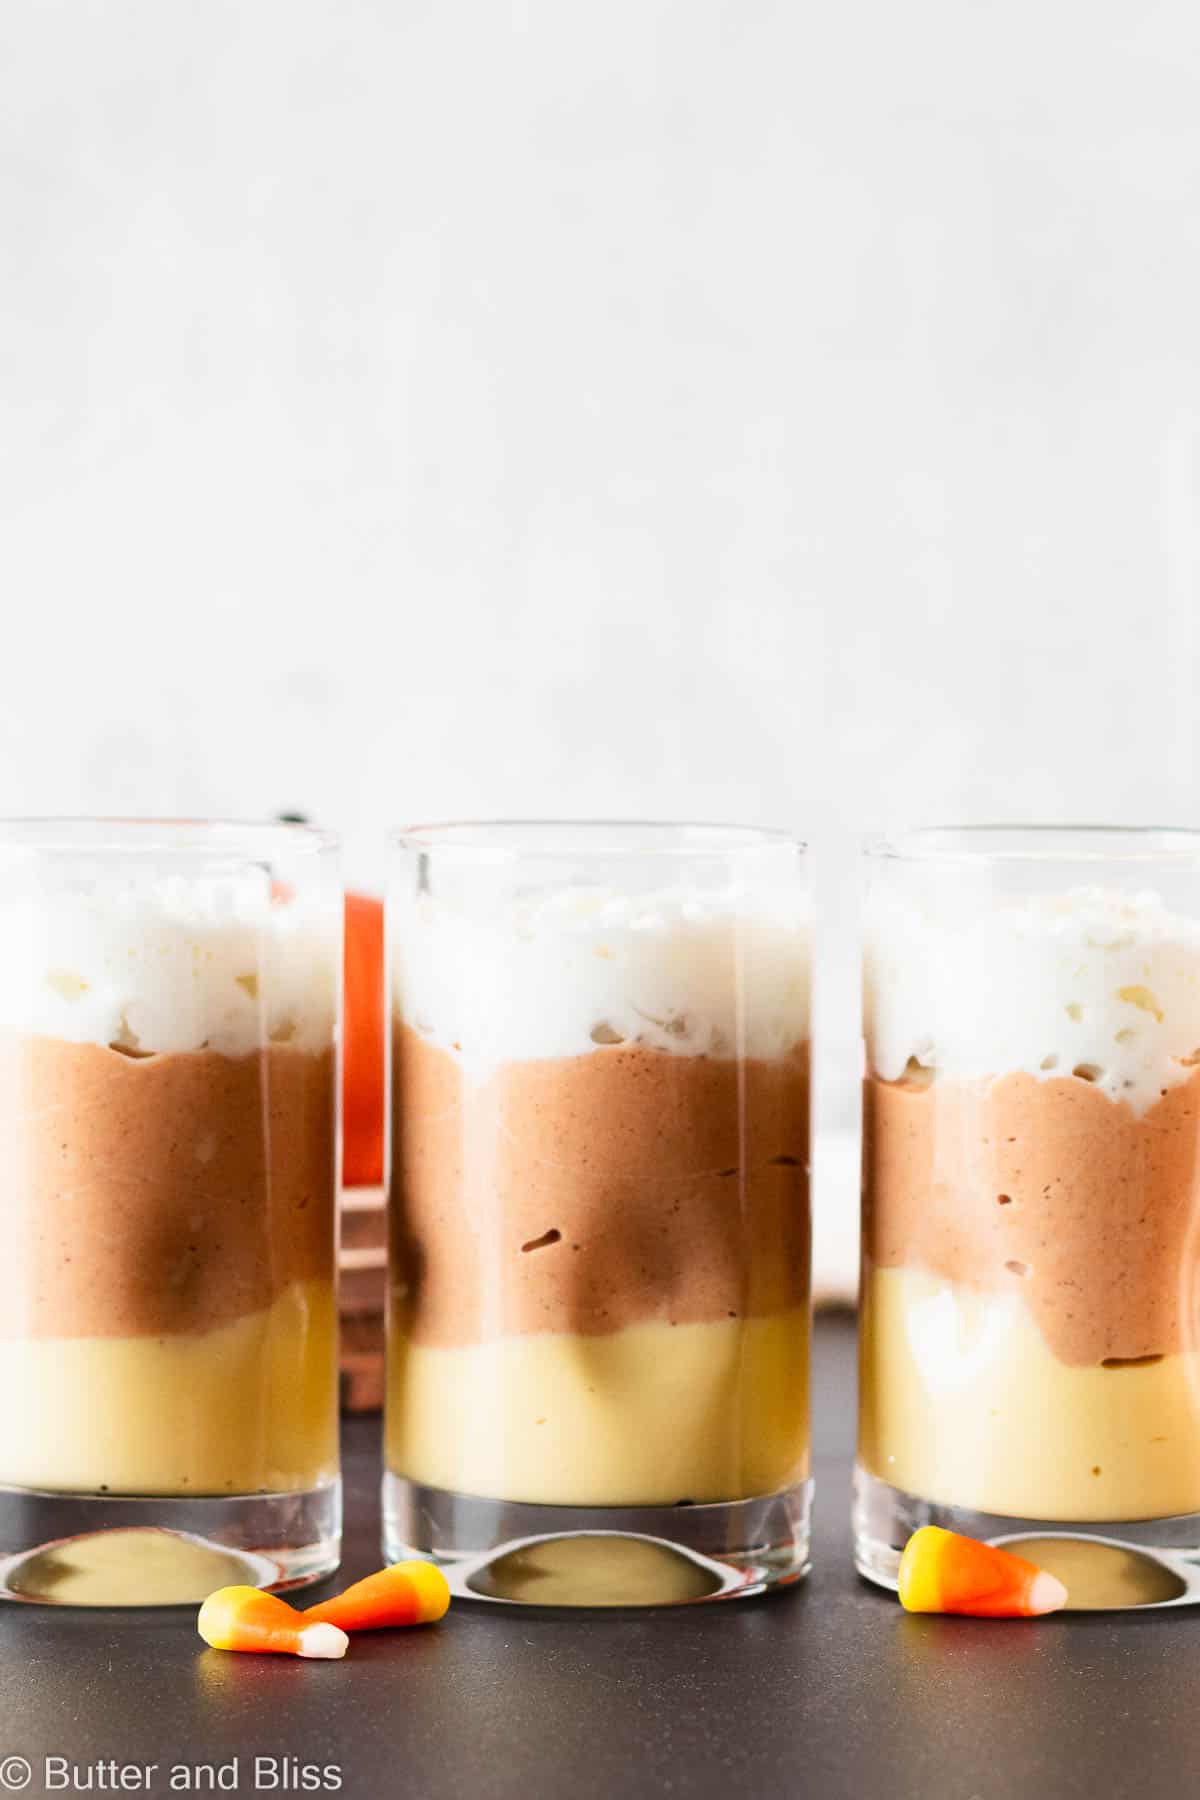 Festive halloween candy inspired layered candy corn pudding desserts lined up in a row.